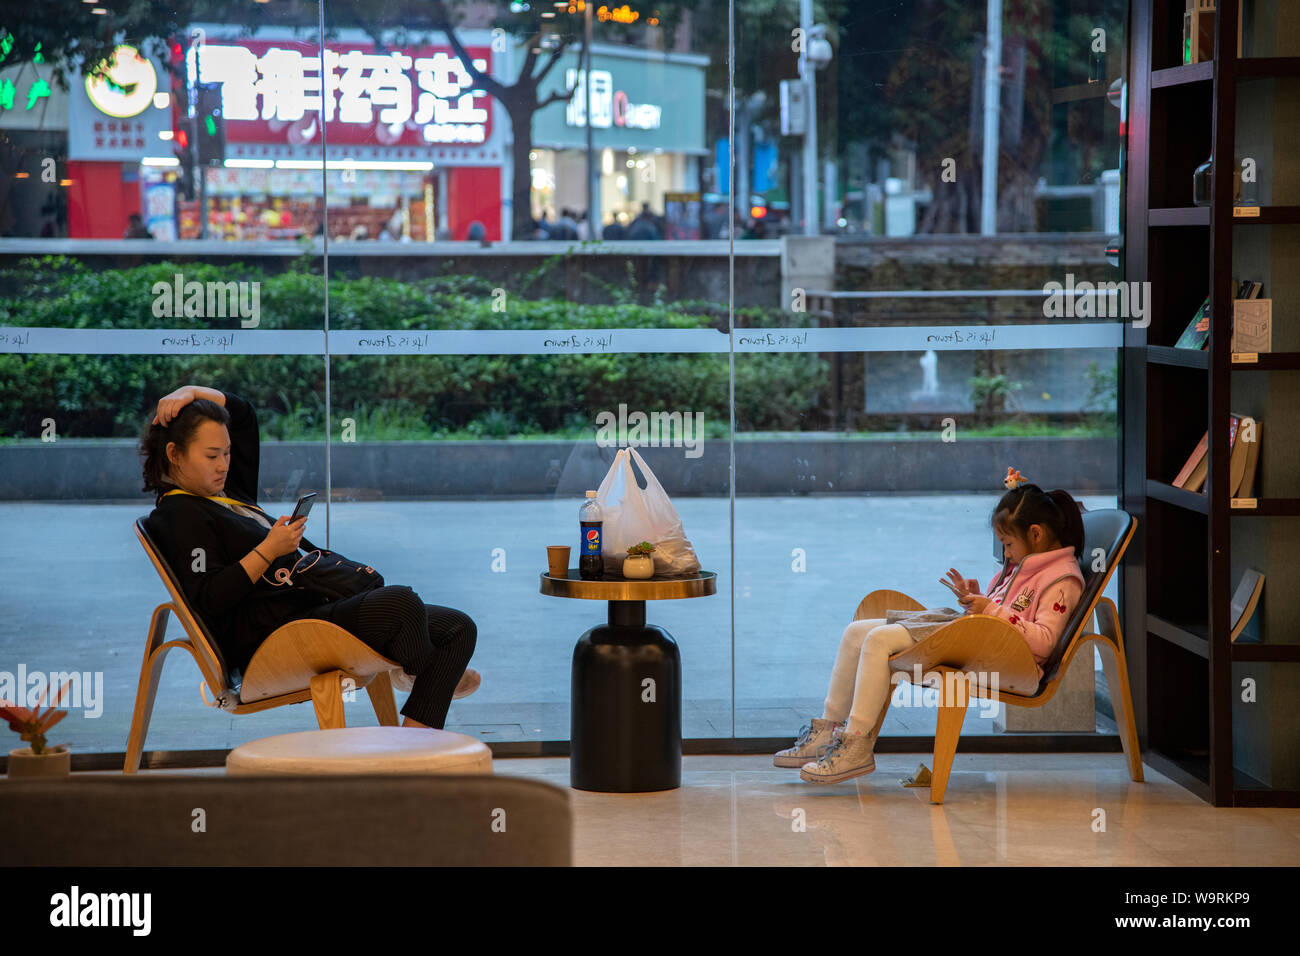 Asia, China, Peoples Republic, Sichuan Province, Chongqing, mother and daughter in hotel lobby *** Local Caption *** Stock Photo